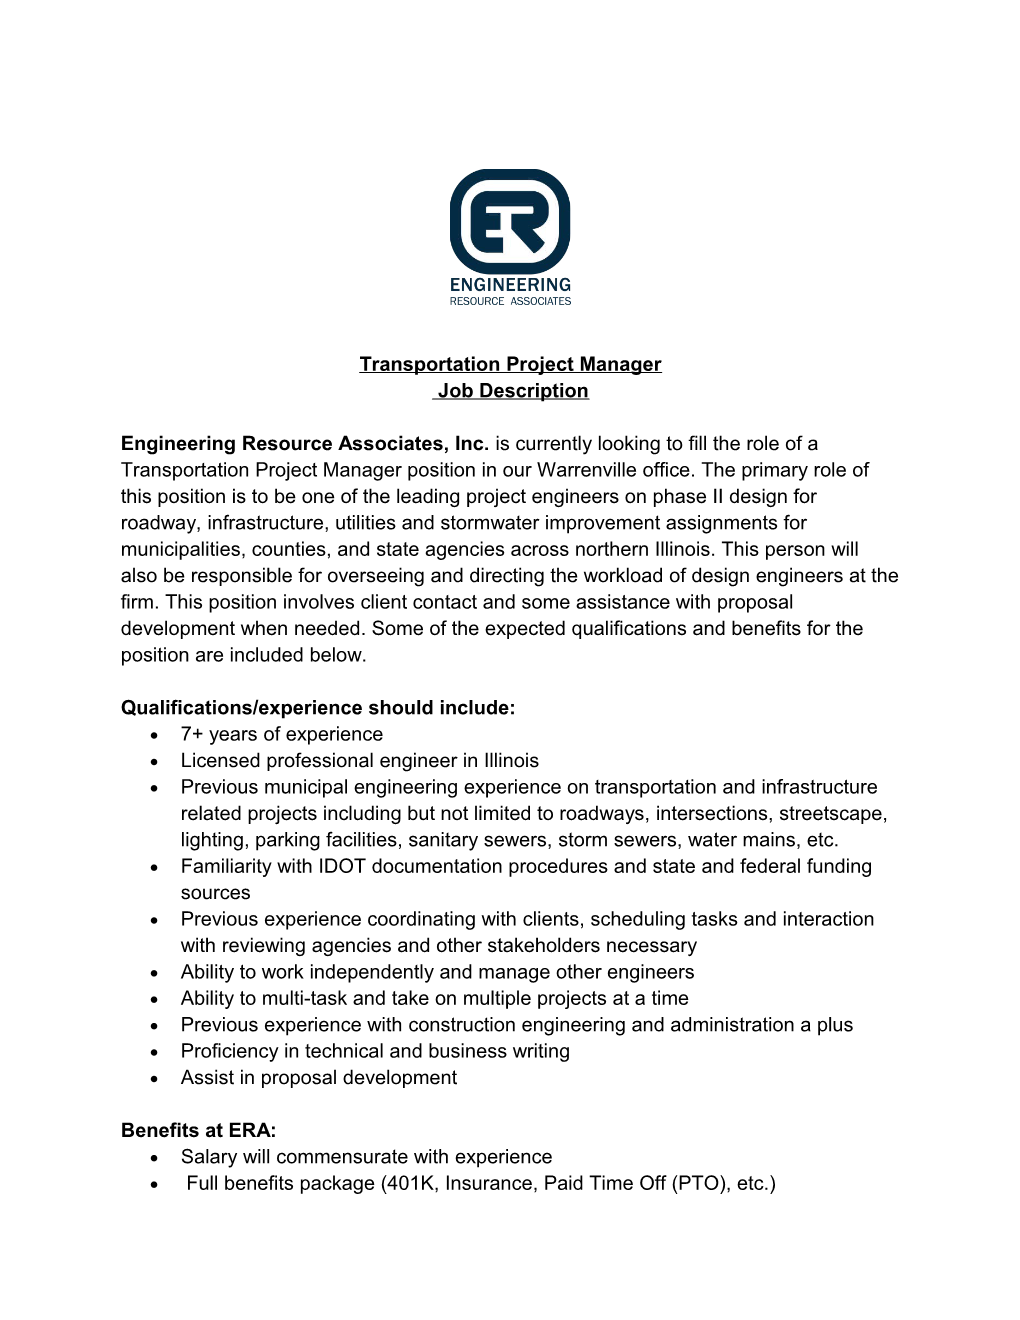 Transportation Project Manager